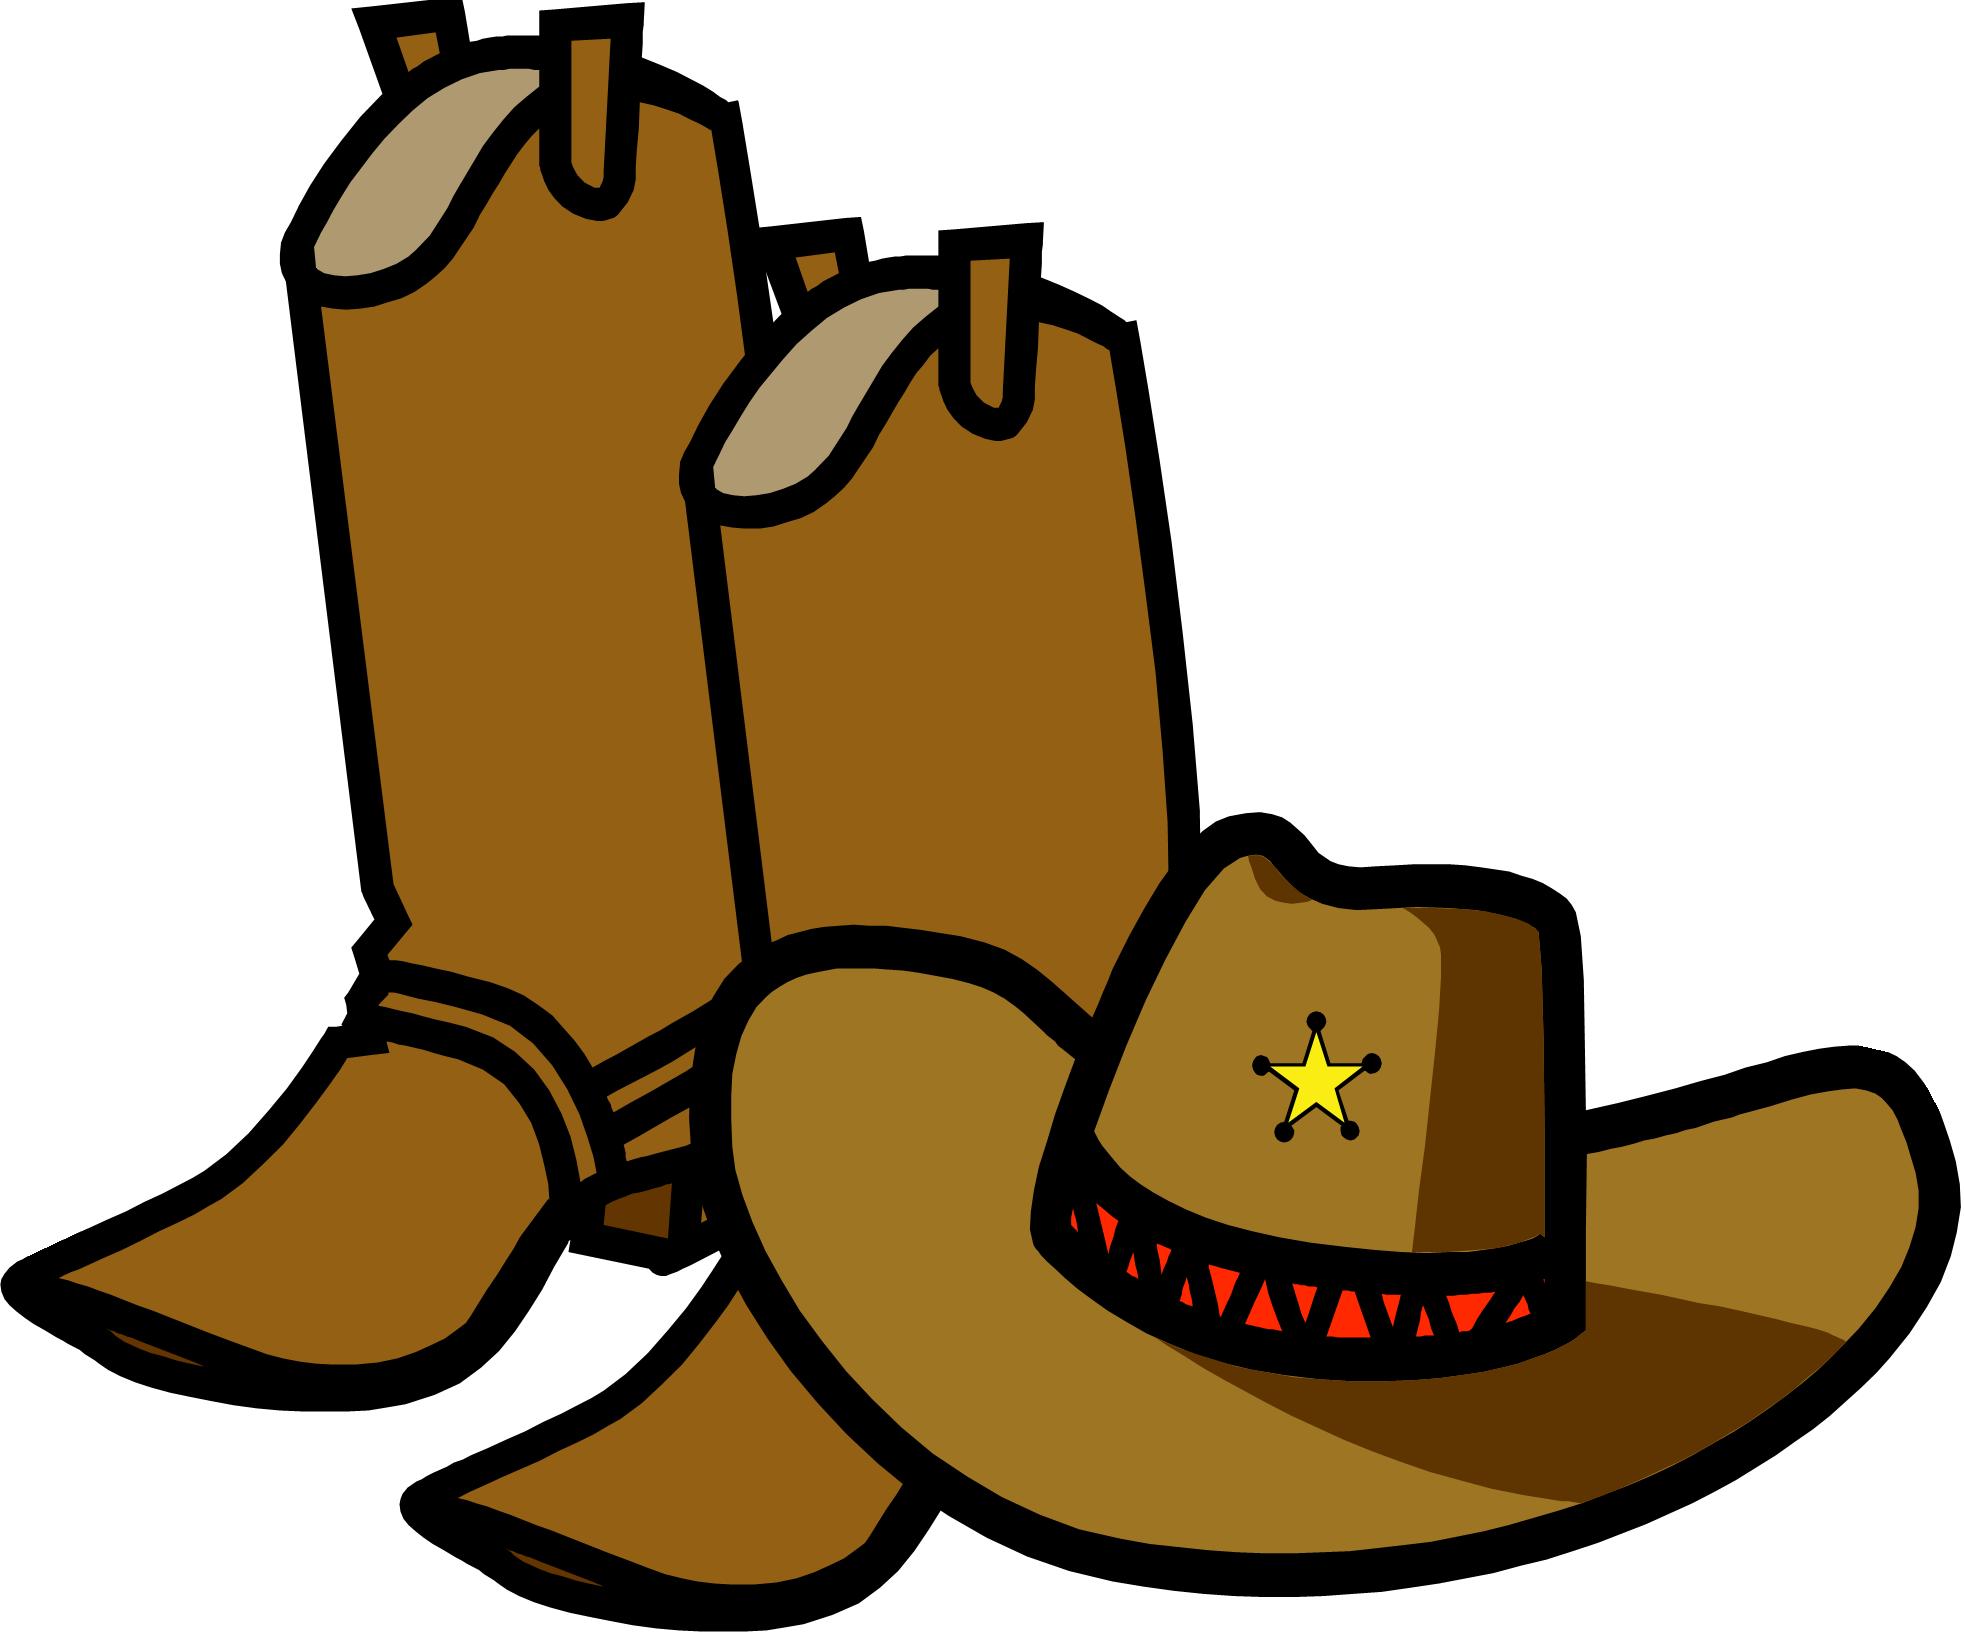 Western clipart #3 - Western Clipart